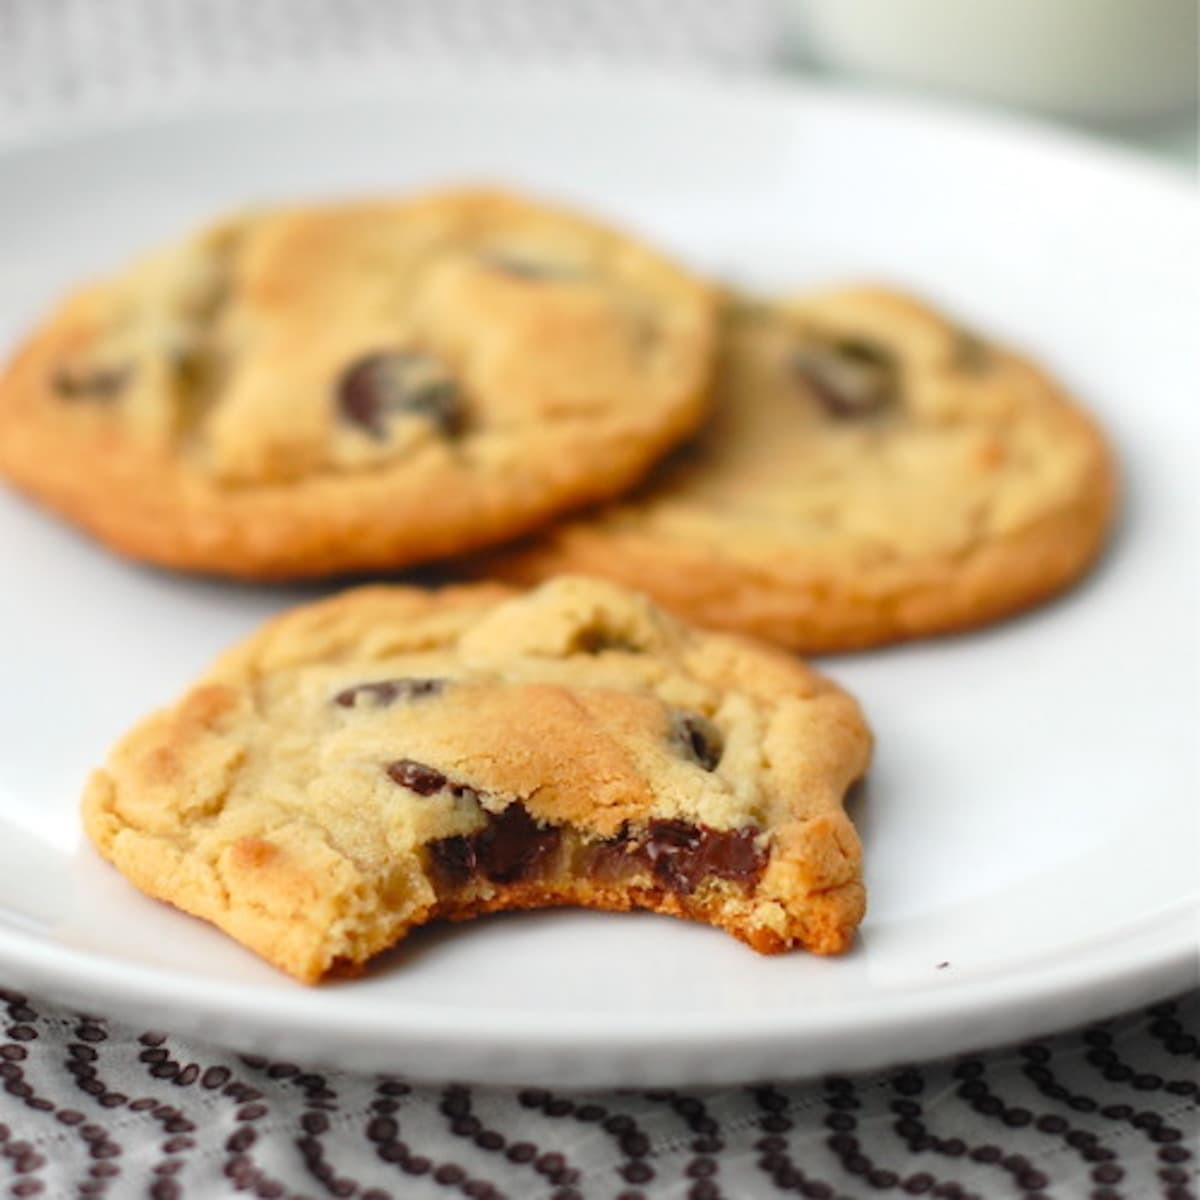 Nyt Chocolate Chip Cookies
 New York Times Chocolate Chip Cookies Recipe Pinch of Yum